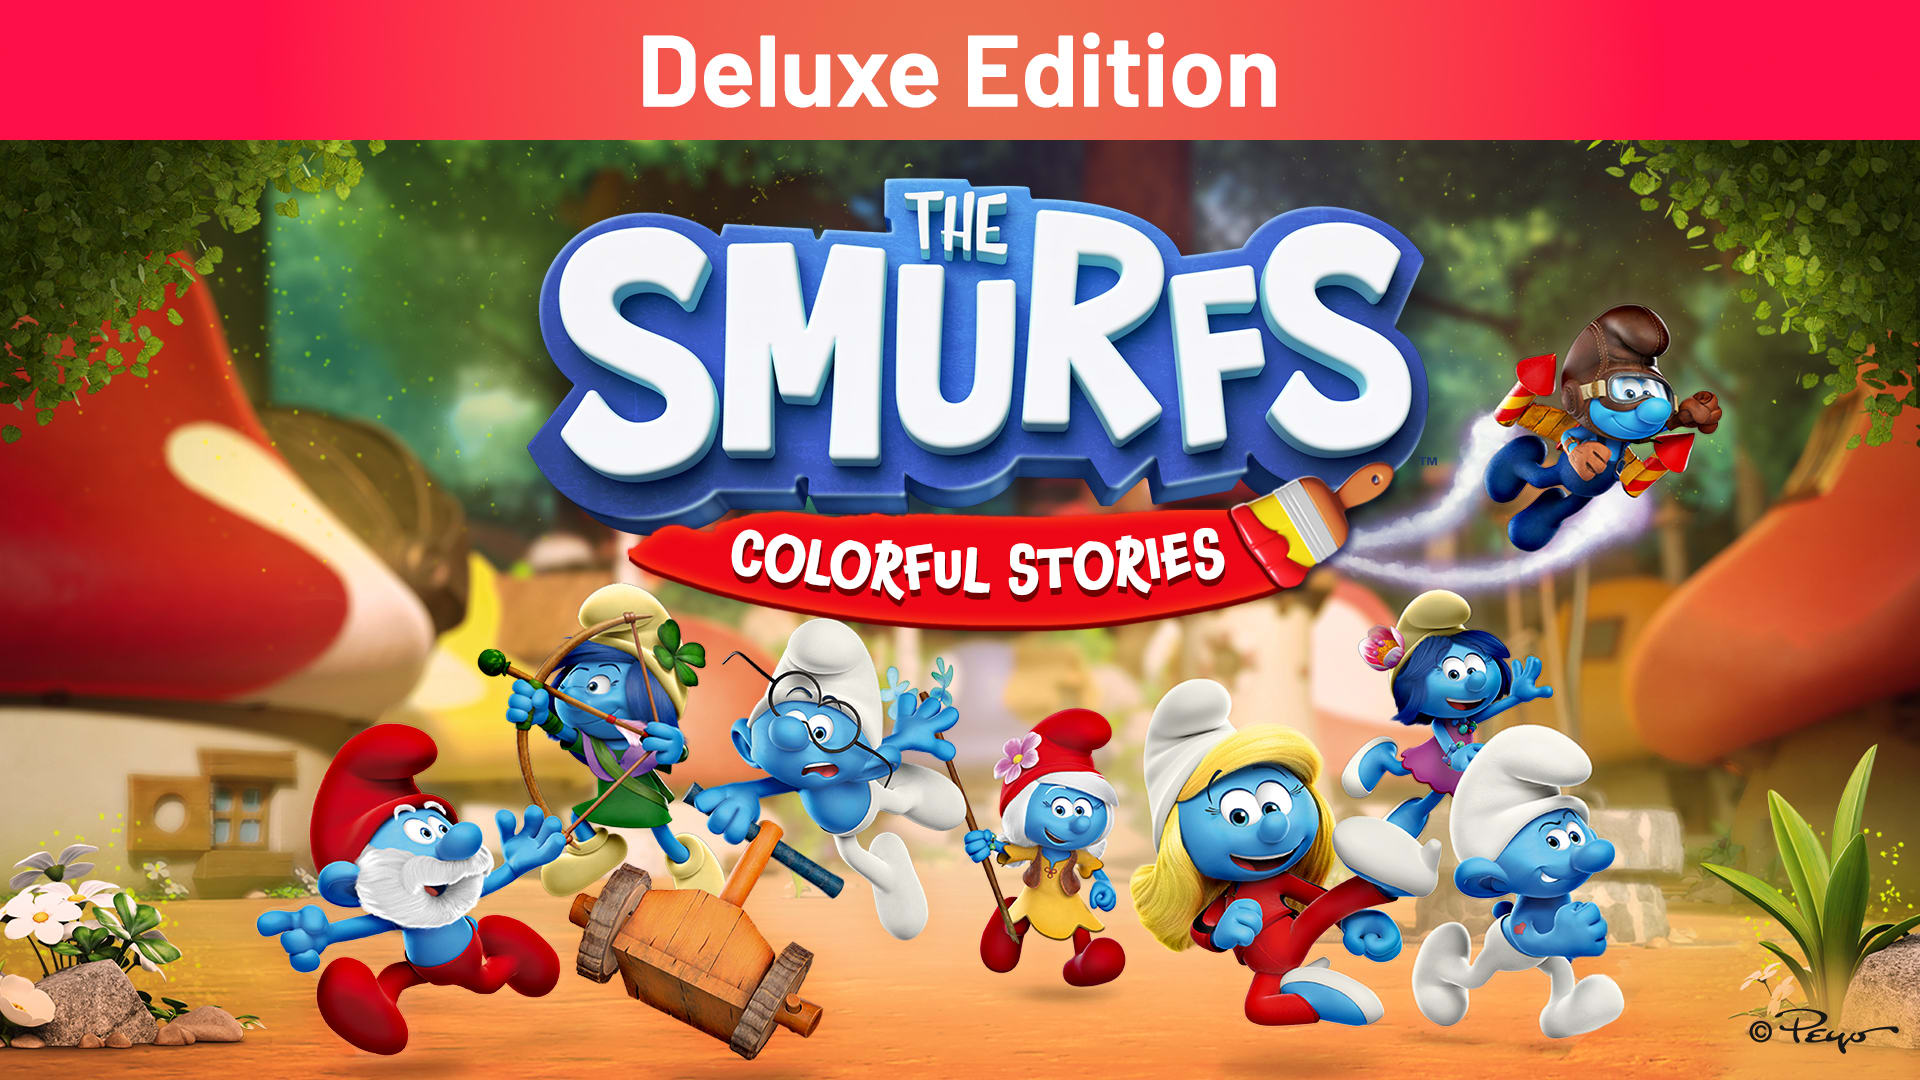 The Smurfs: Colorful Stories Deluxe Edition